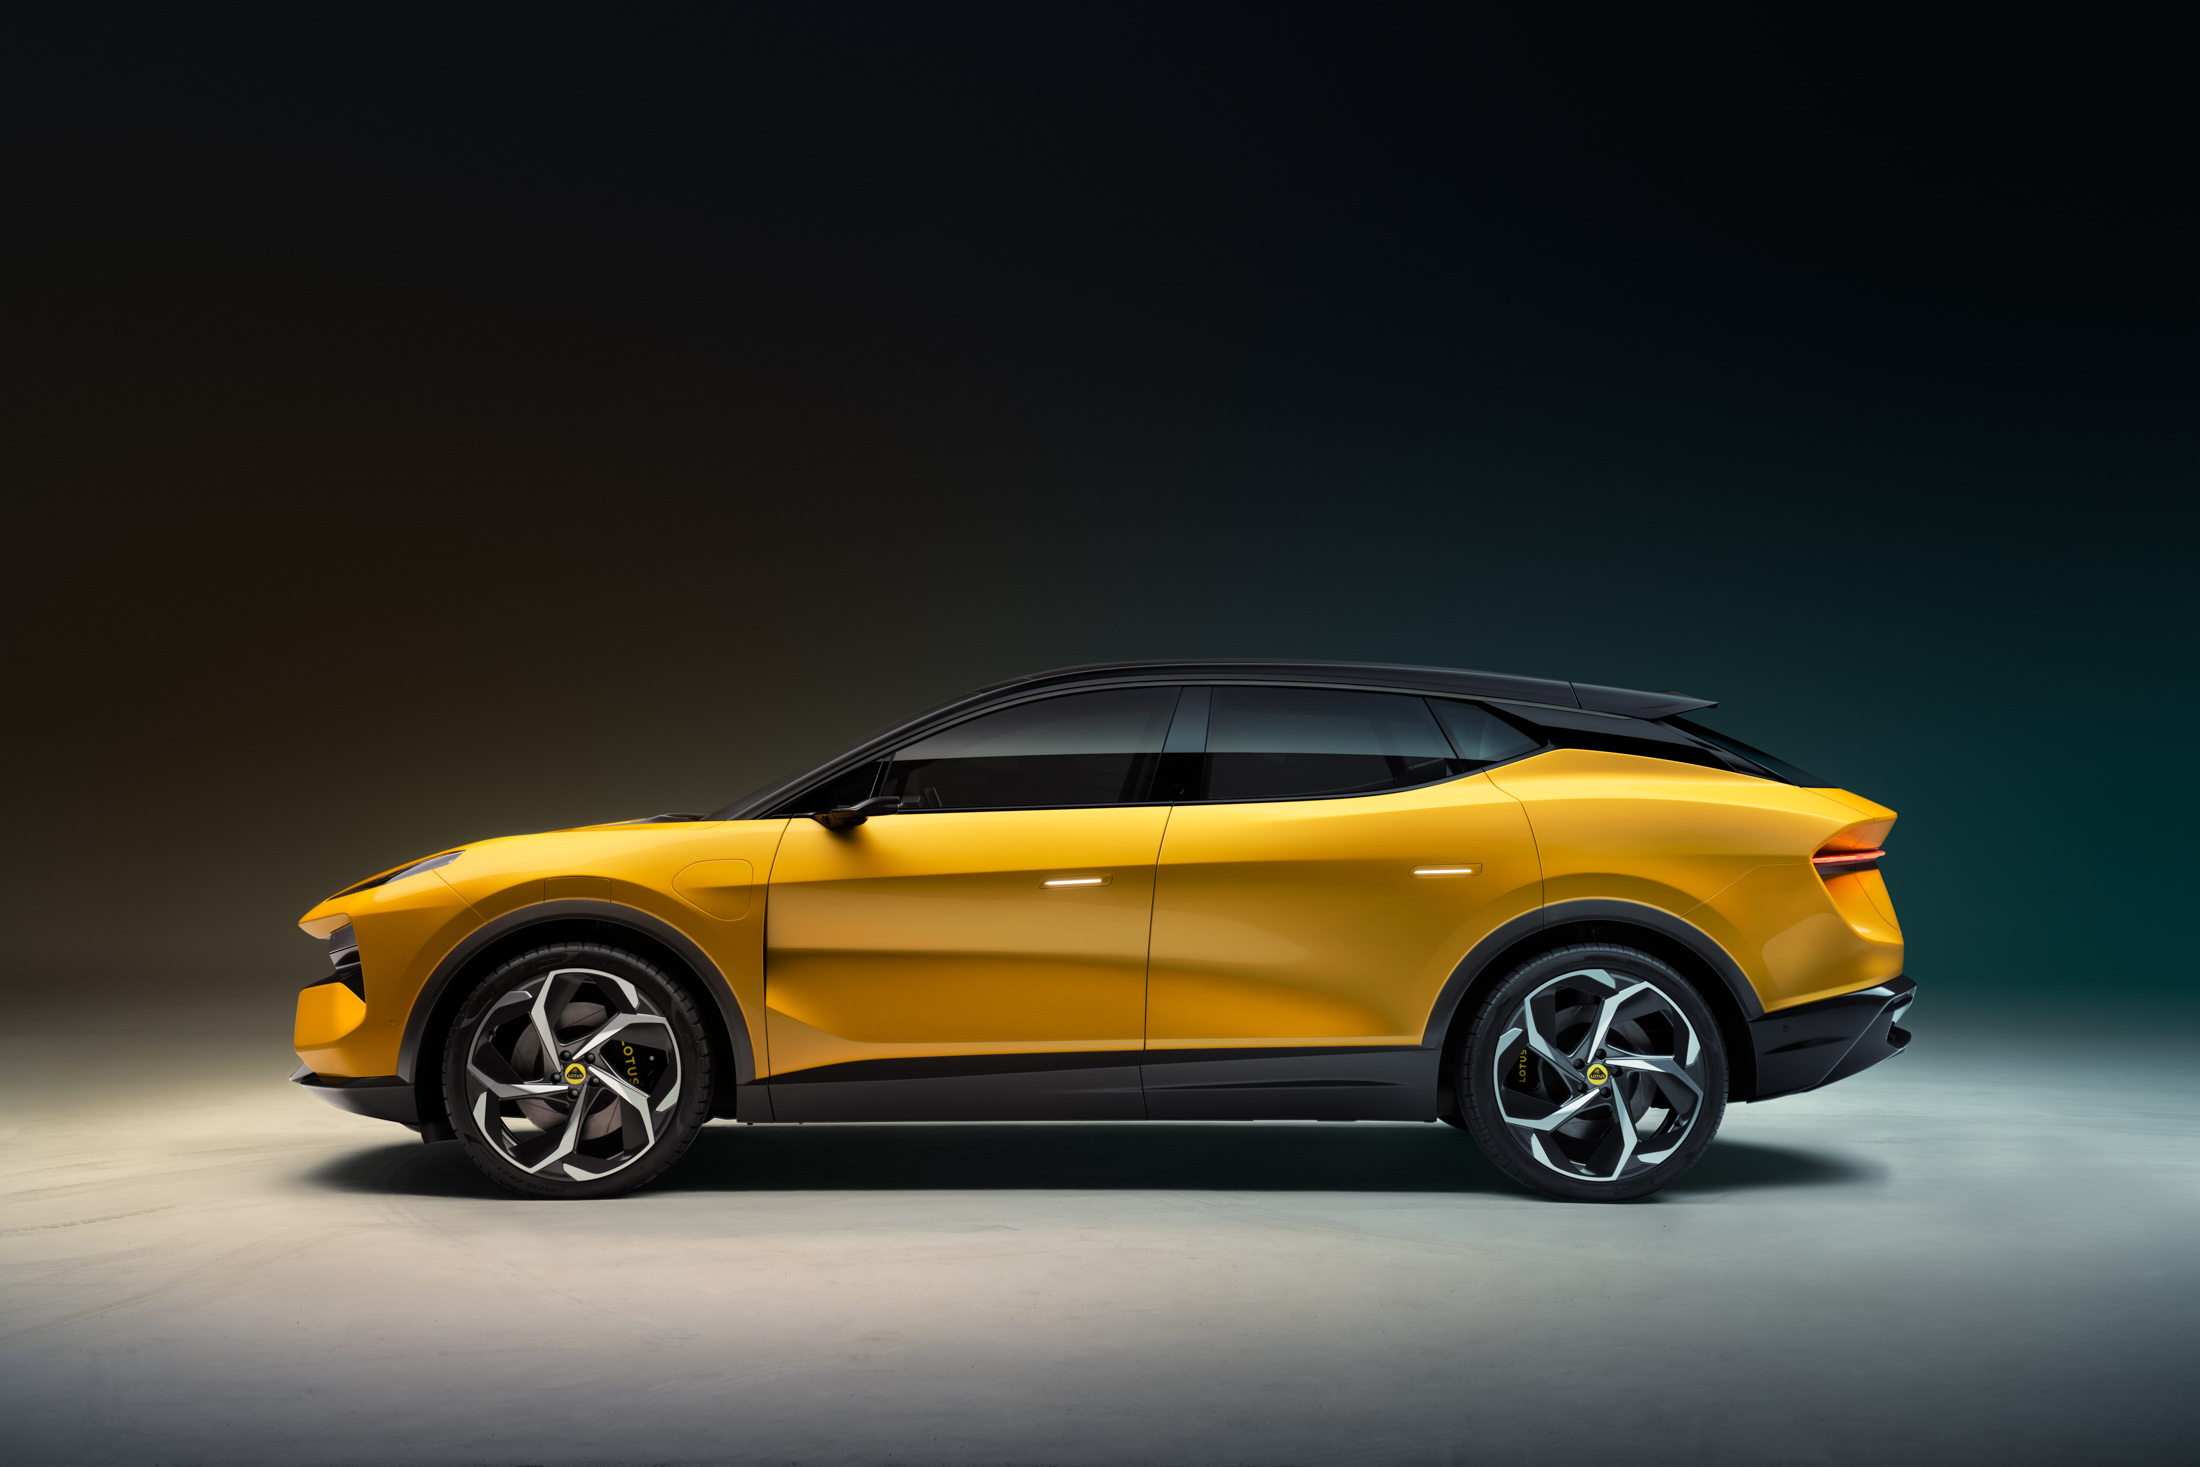 New Lotus Eletre Electric SUV Is Major China-Made Pivot for UK Sports Car  Brand - Bloomberg